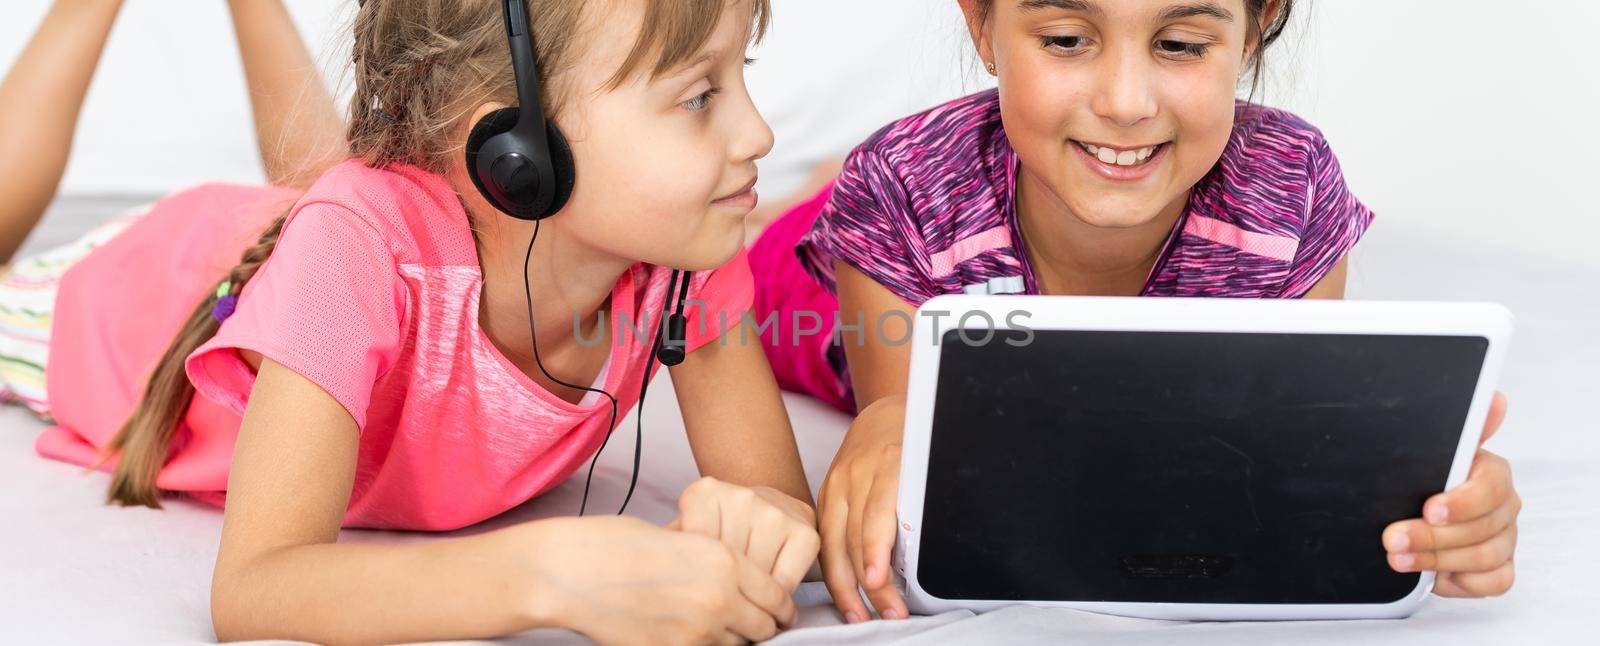 Two cute little girls are using a digital tablet and smiling while lying on bed in children's room by Andelov13